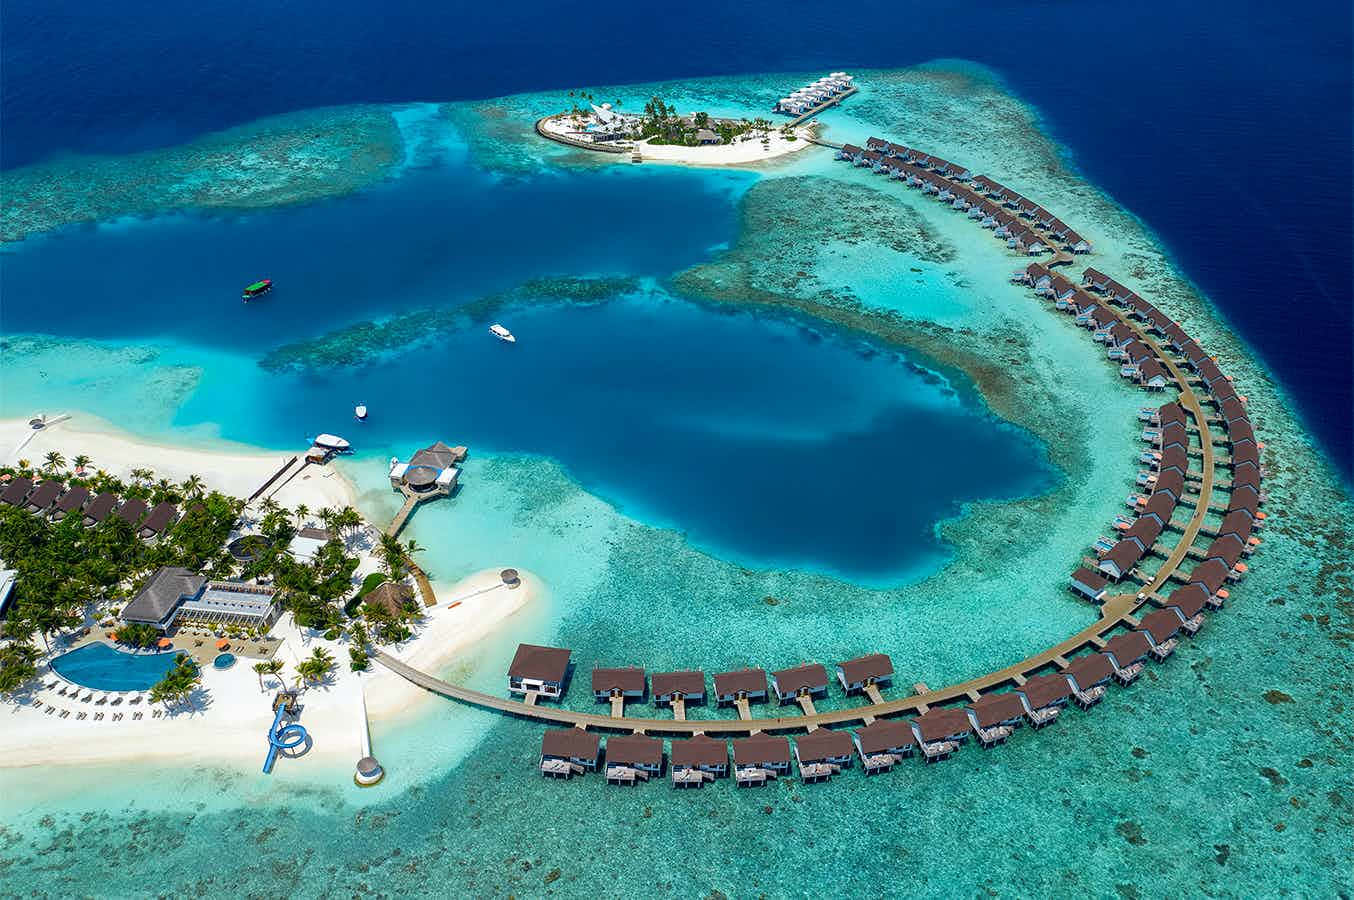 Experience the beauty of the Maldives